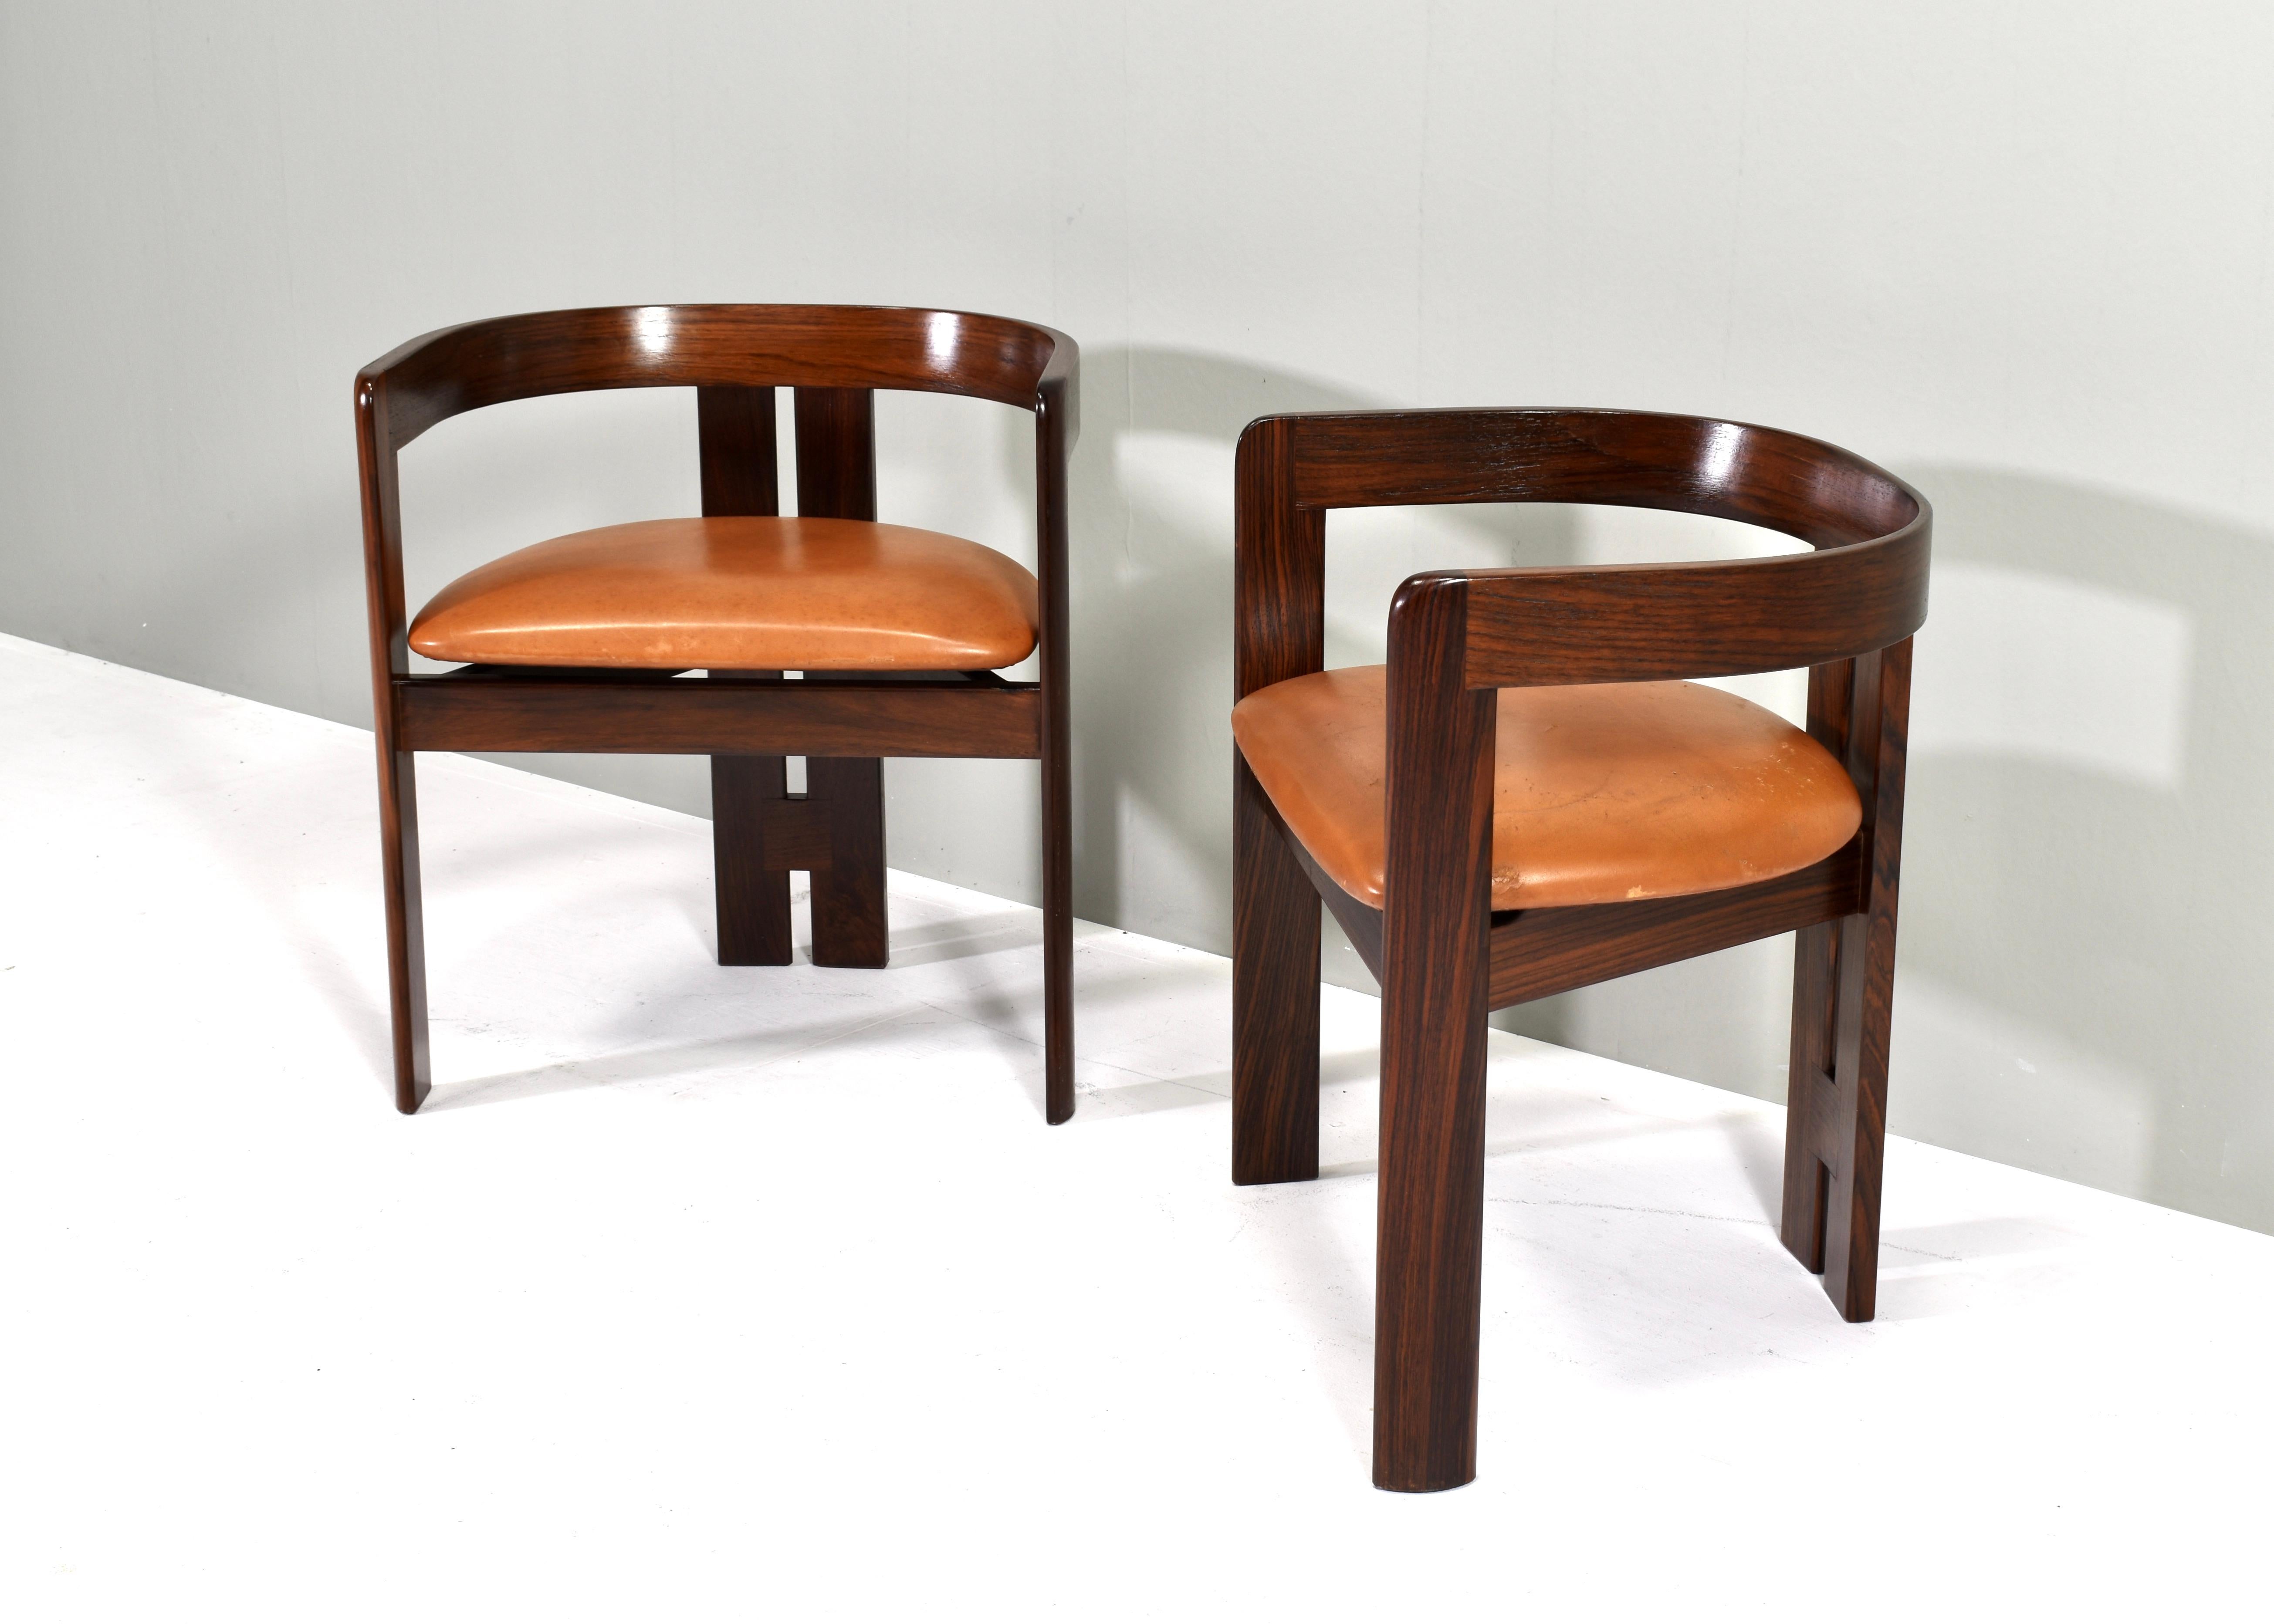 Elegant pair of Pigreco chairs by Afra & Tobia Scarpa for Gavina, Italy – circa 1970.
The chairs are still upholstered in the original tan leather. The condition of the wood is excellent. The leather is good / fair. Both leather seats have signs of